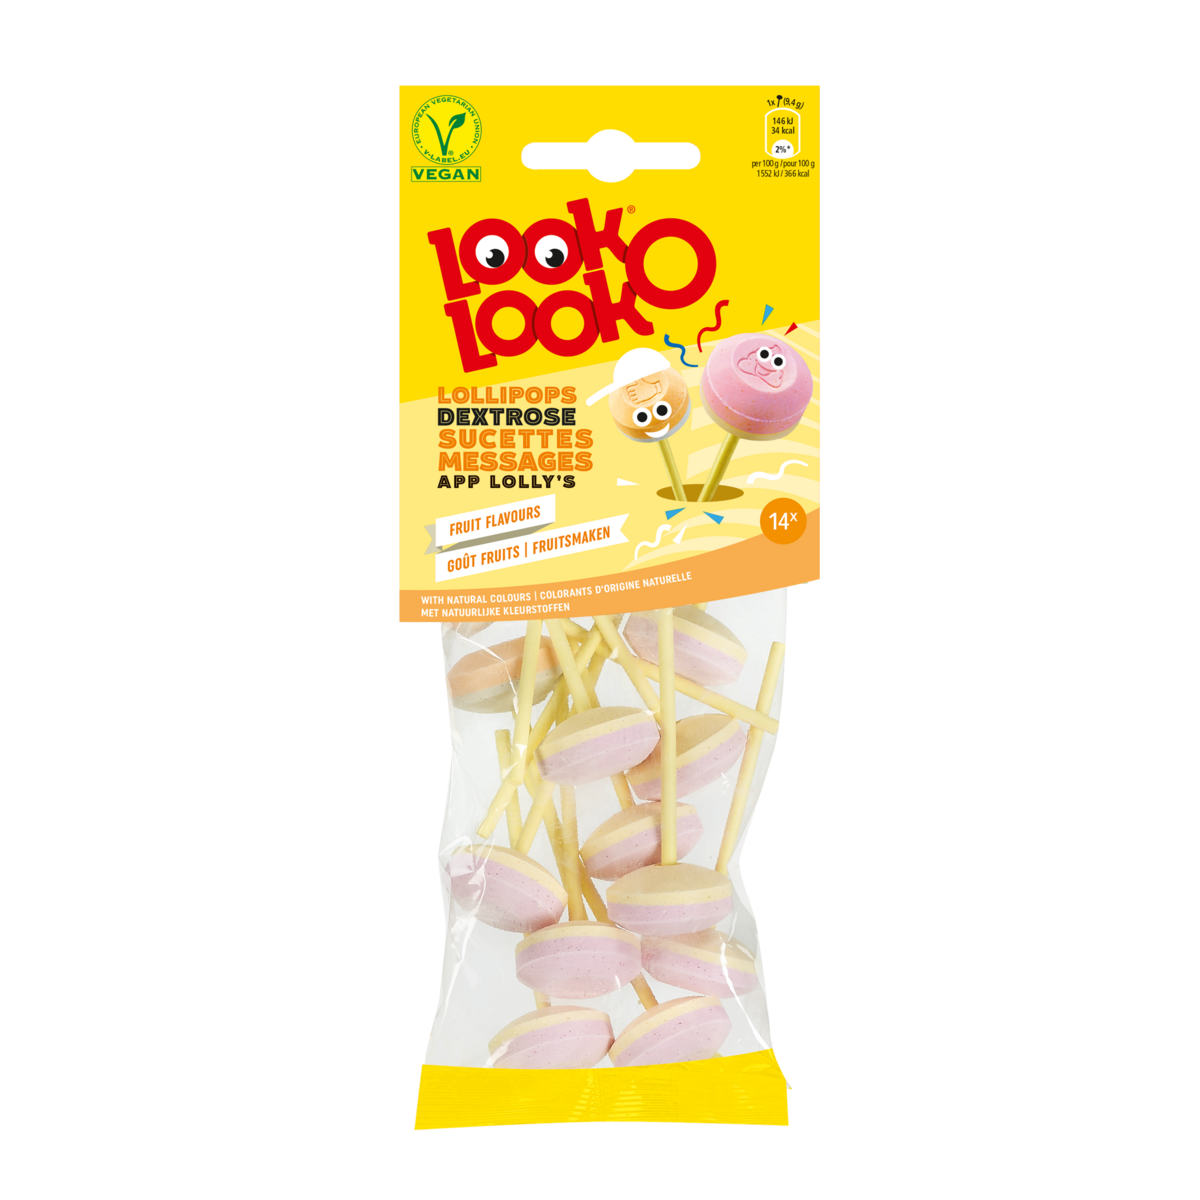 LOOK O LOOK Sucettes lolly's goût fruits 130g